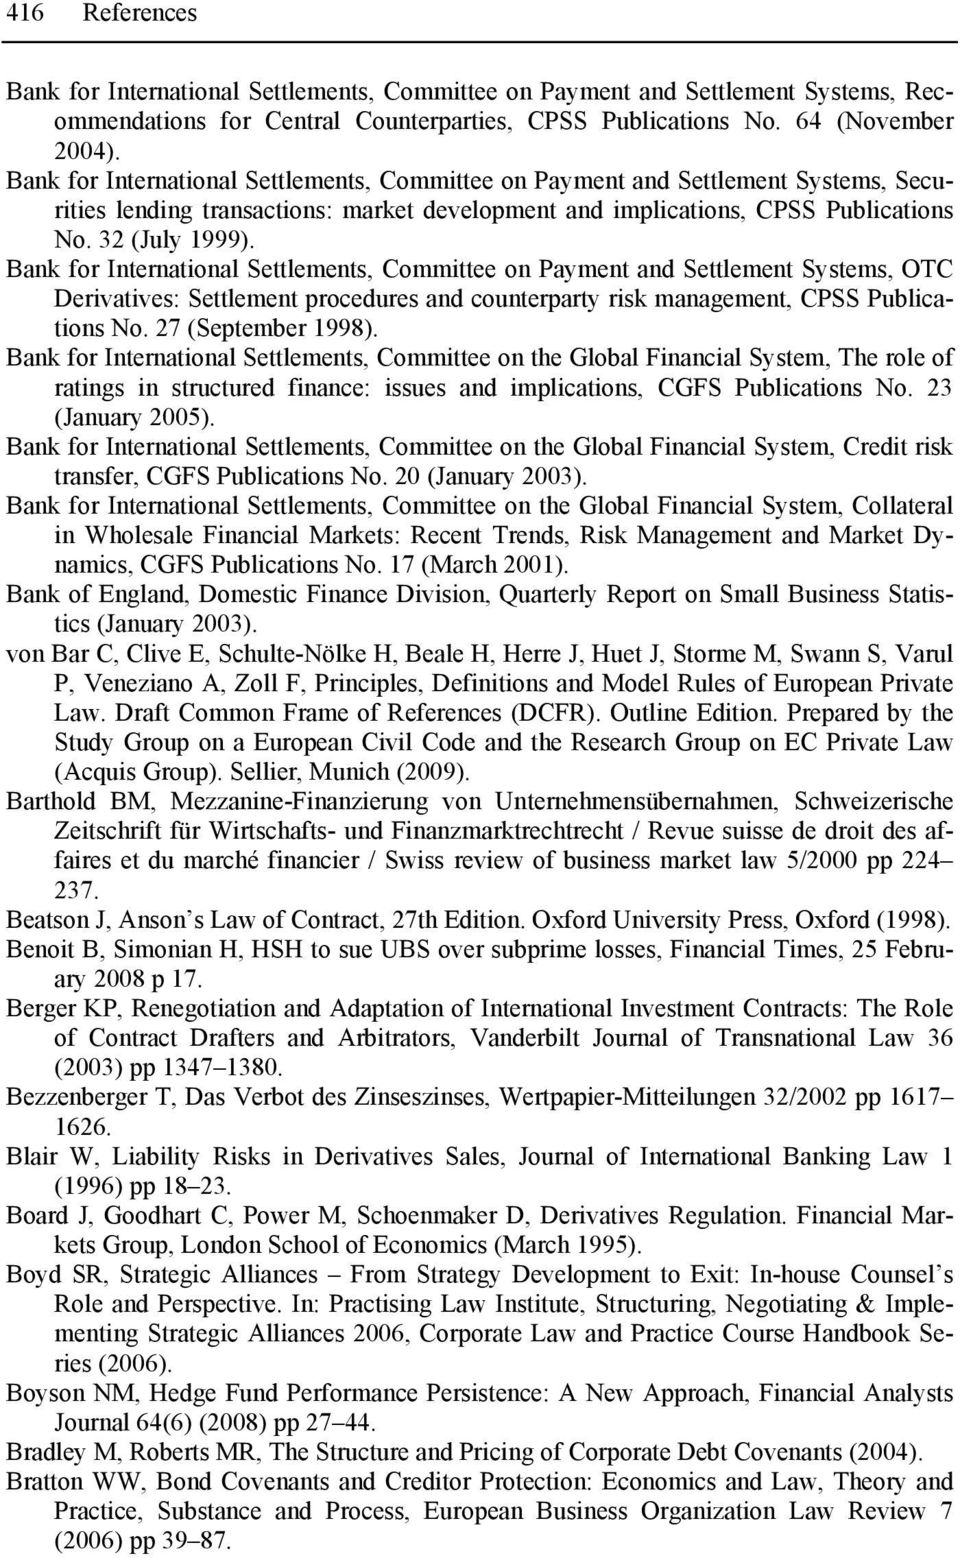 Bank for International Settlements, Committee on Payment and Settlement Systems, OTC Derivatives: Settlement procedures and counterparty risk management, CPSS Publications No. 27 (September 1998).